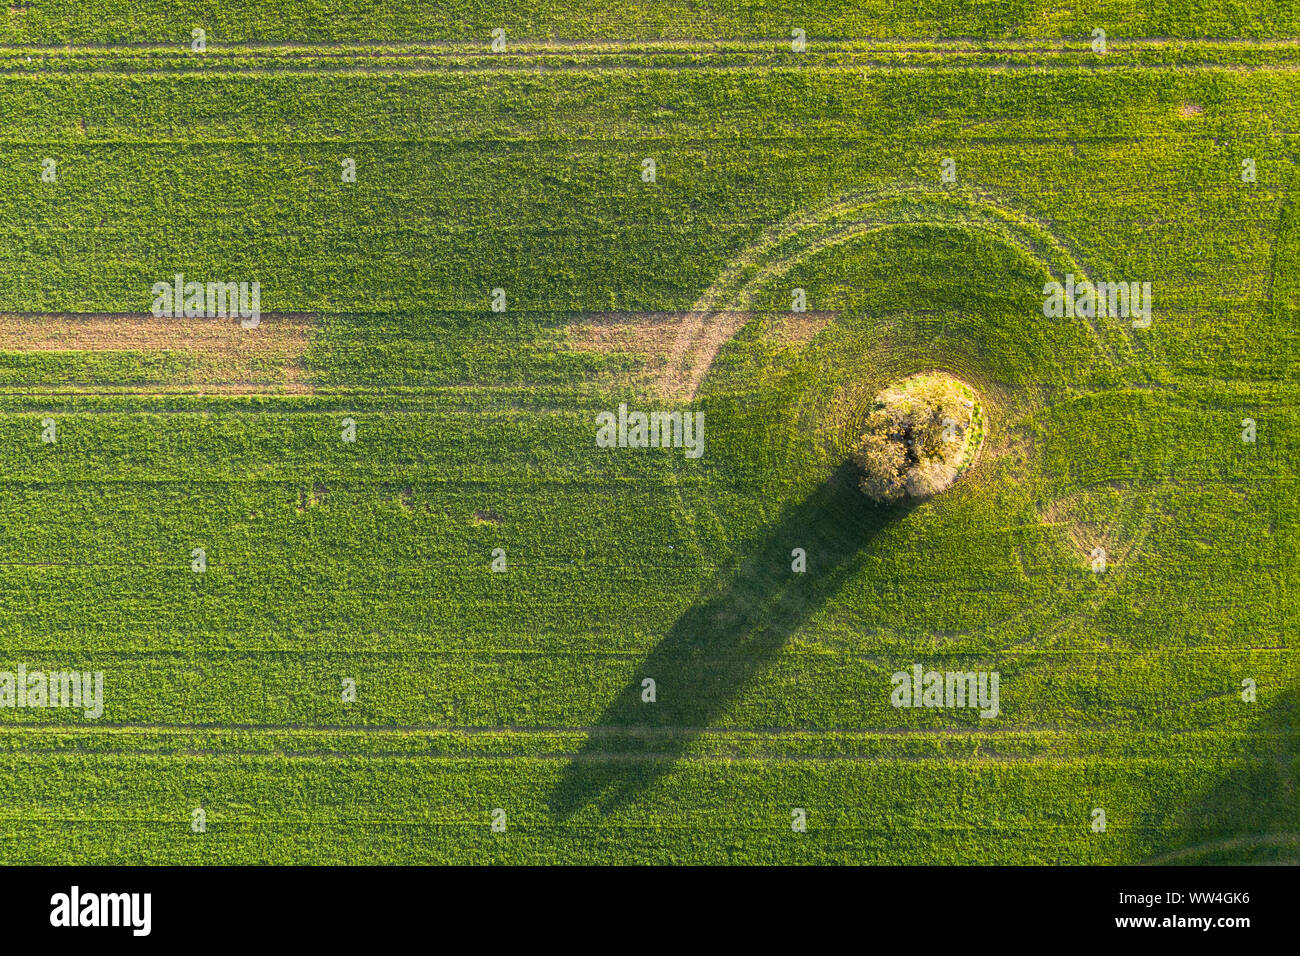 Tractor tracks around a tree in the middle of a field in Sweden Stock Photo